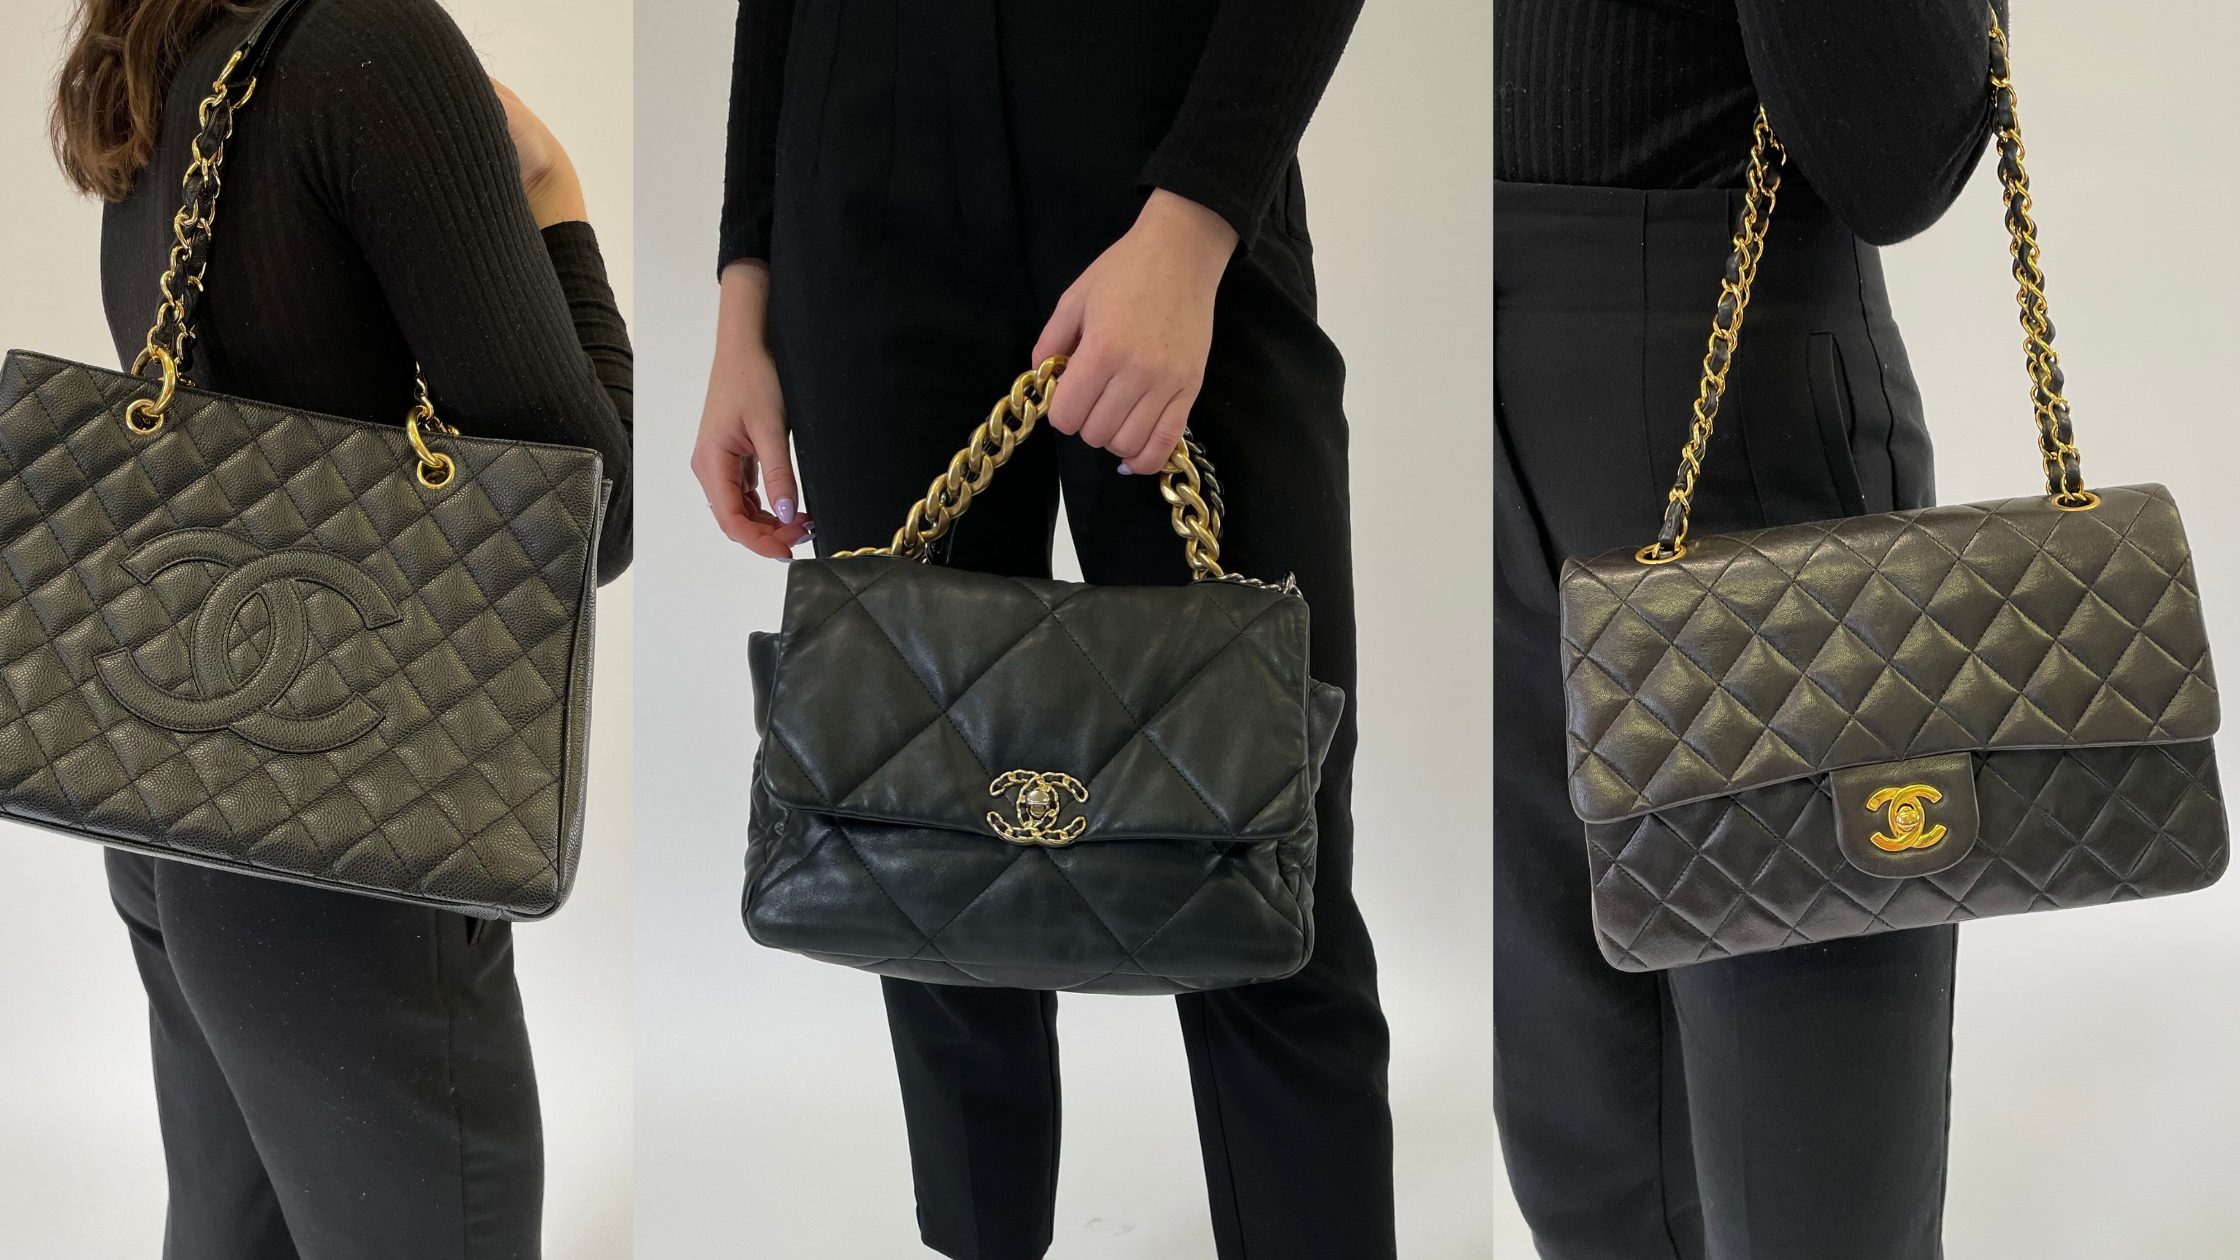 Cheap Best High-Quality Replica Chanel bags and Purses on Sale